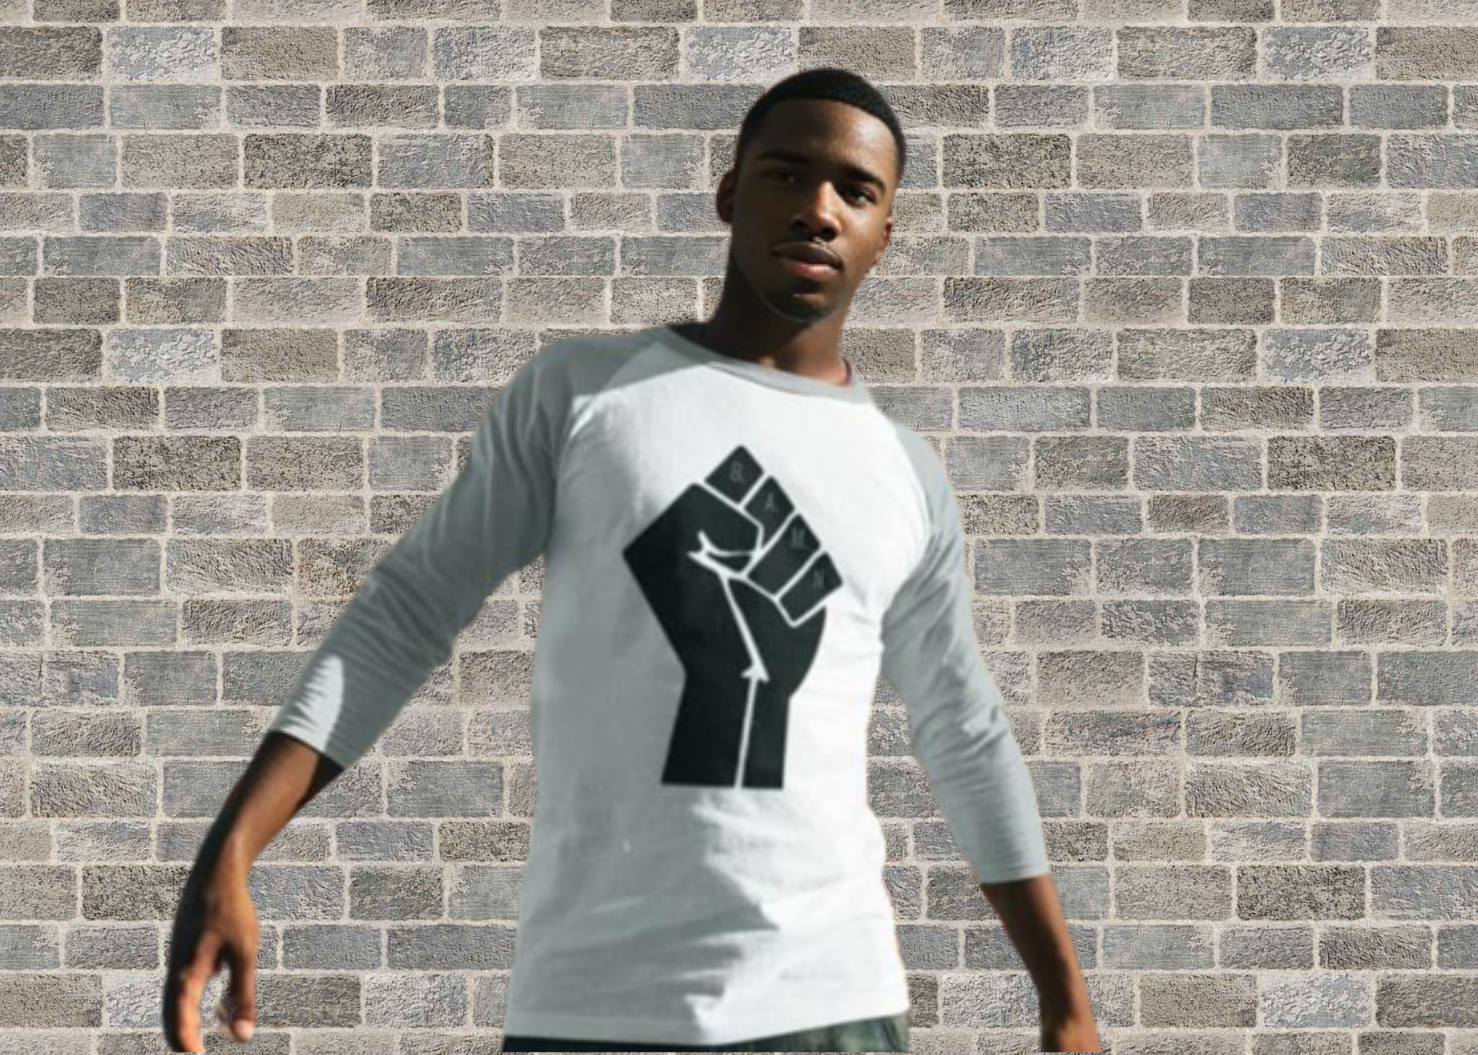 - B.A.M.N (By Any Means Necessary) Clothing Men's 3/4 Sleeve Raglan Shirt - Mens T-Shirts at TFC&H Co.